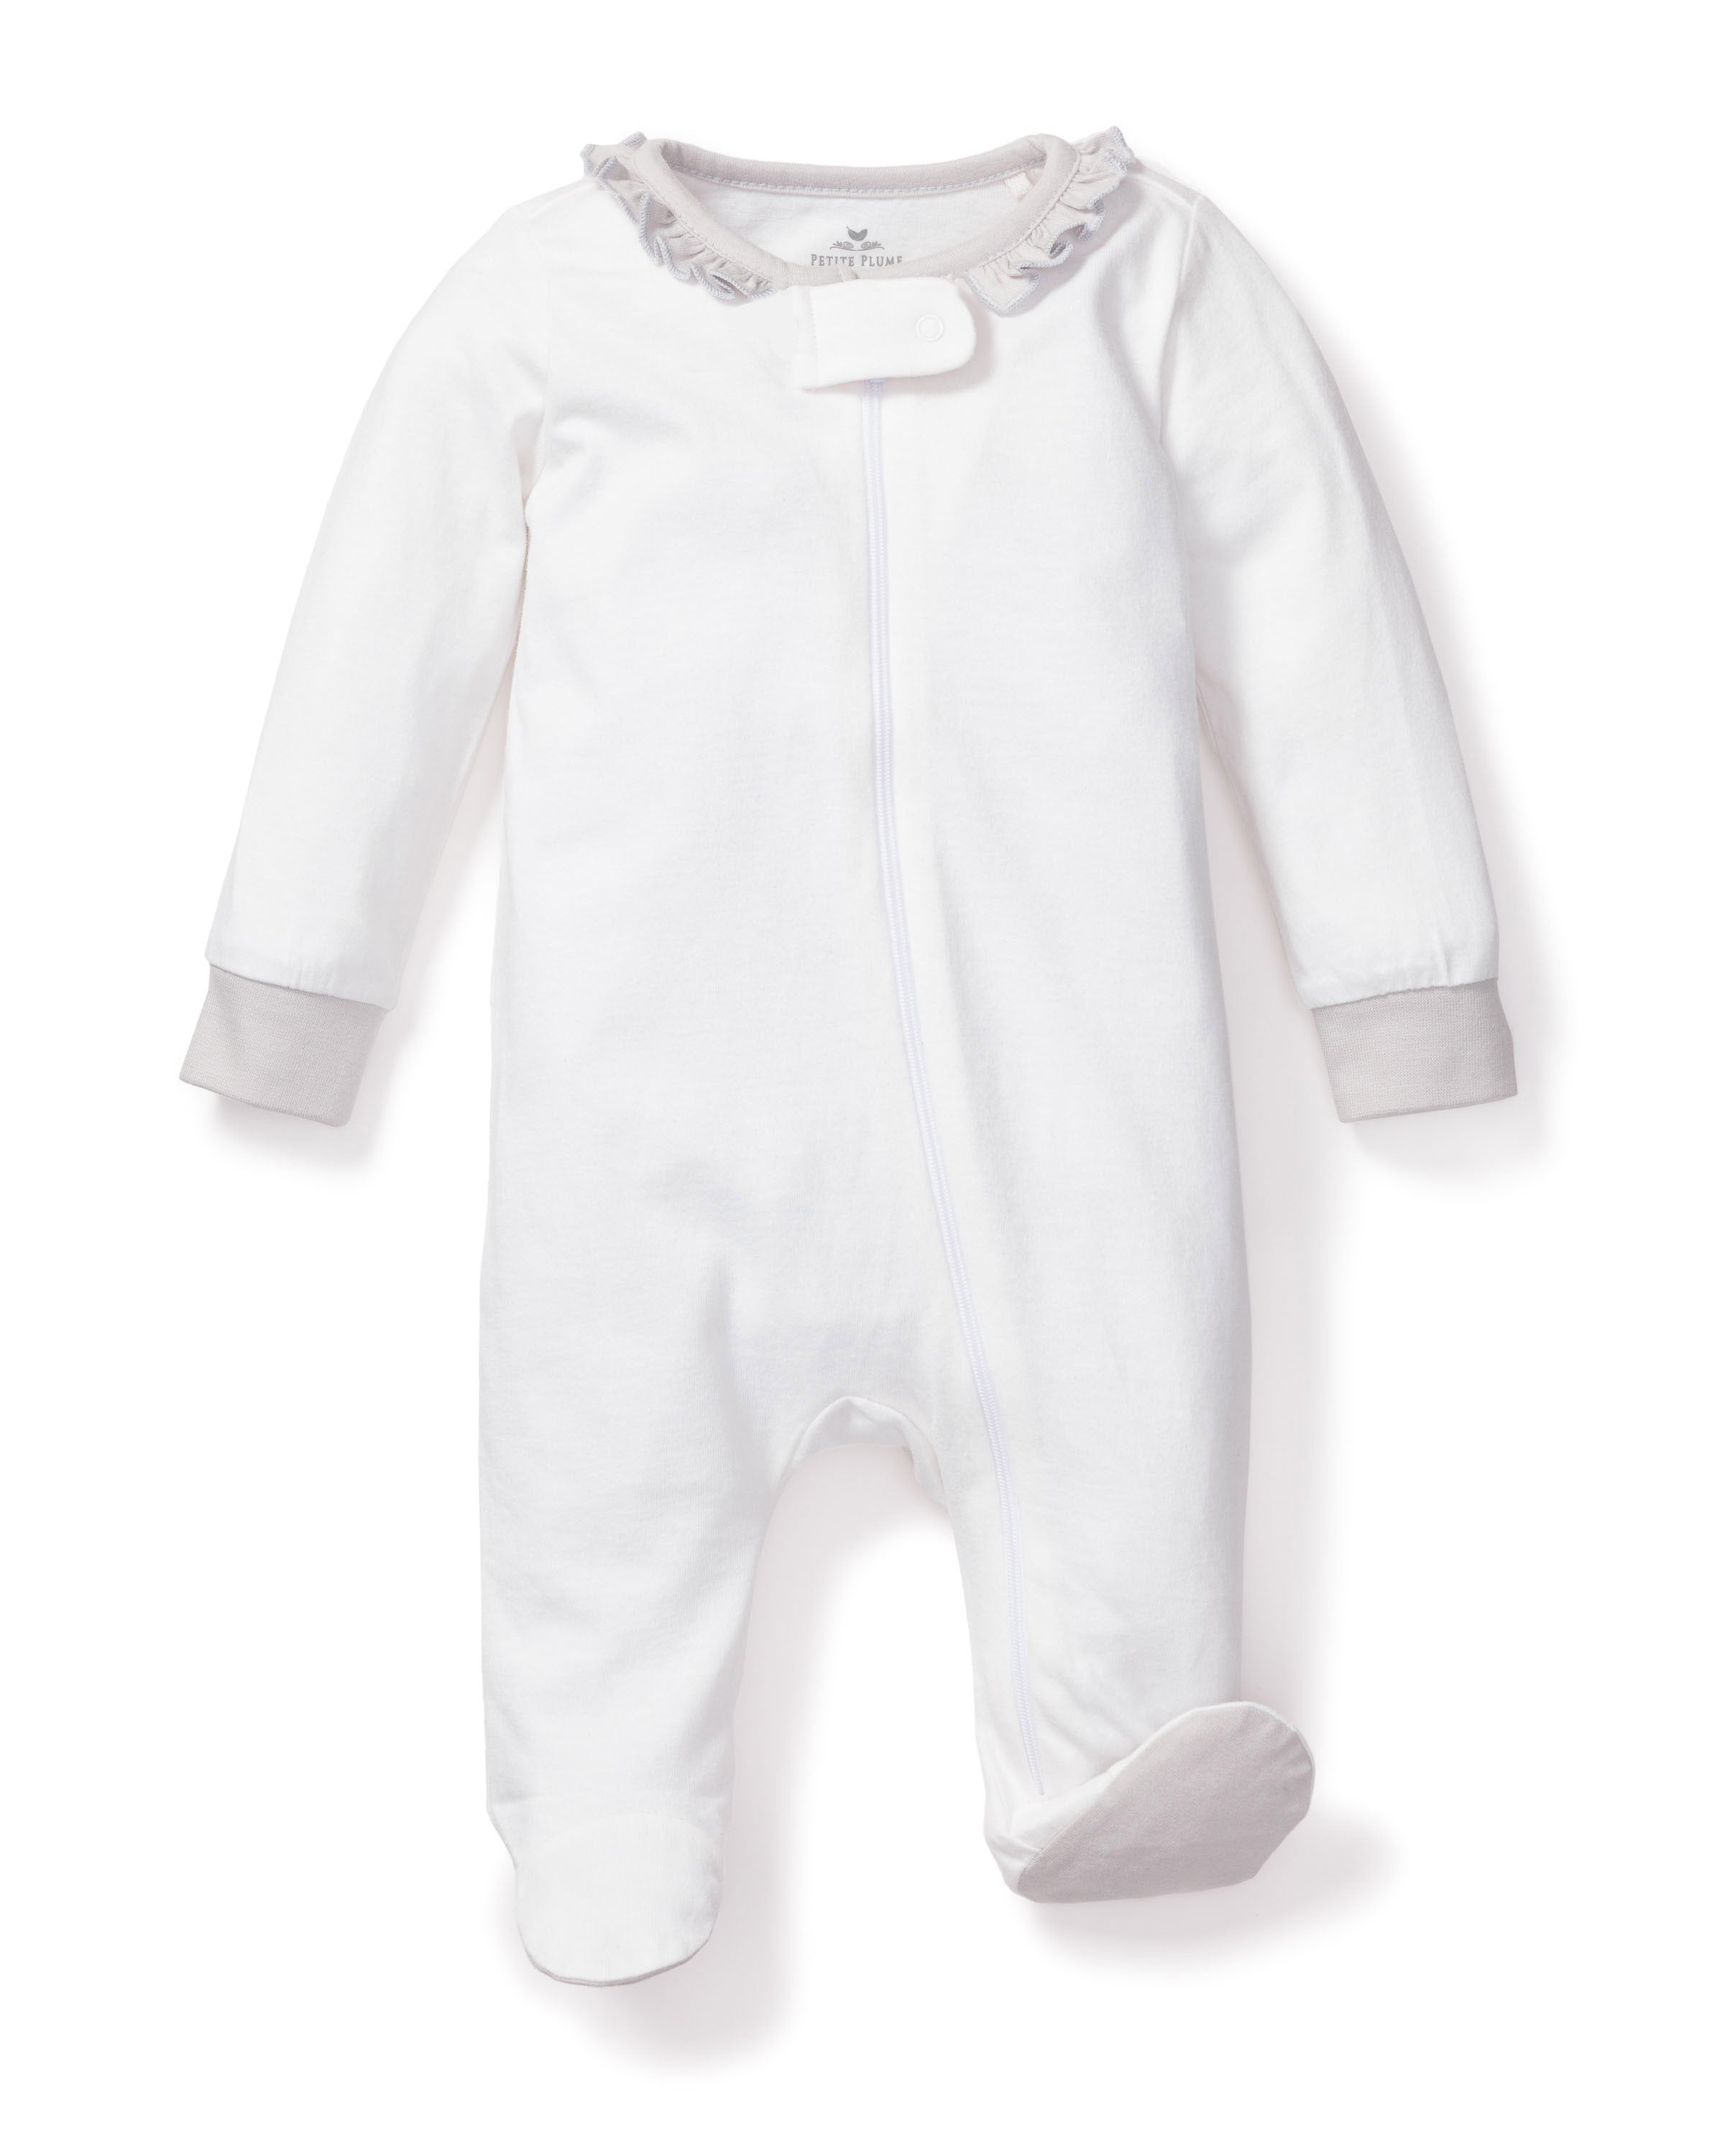 Baby's Organic Cotton Romper in White with Grey Ruffled Collar